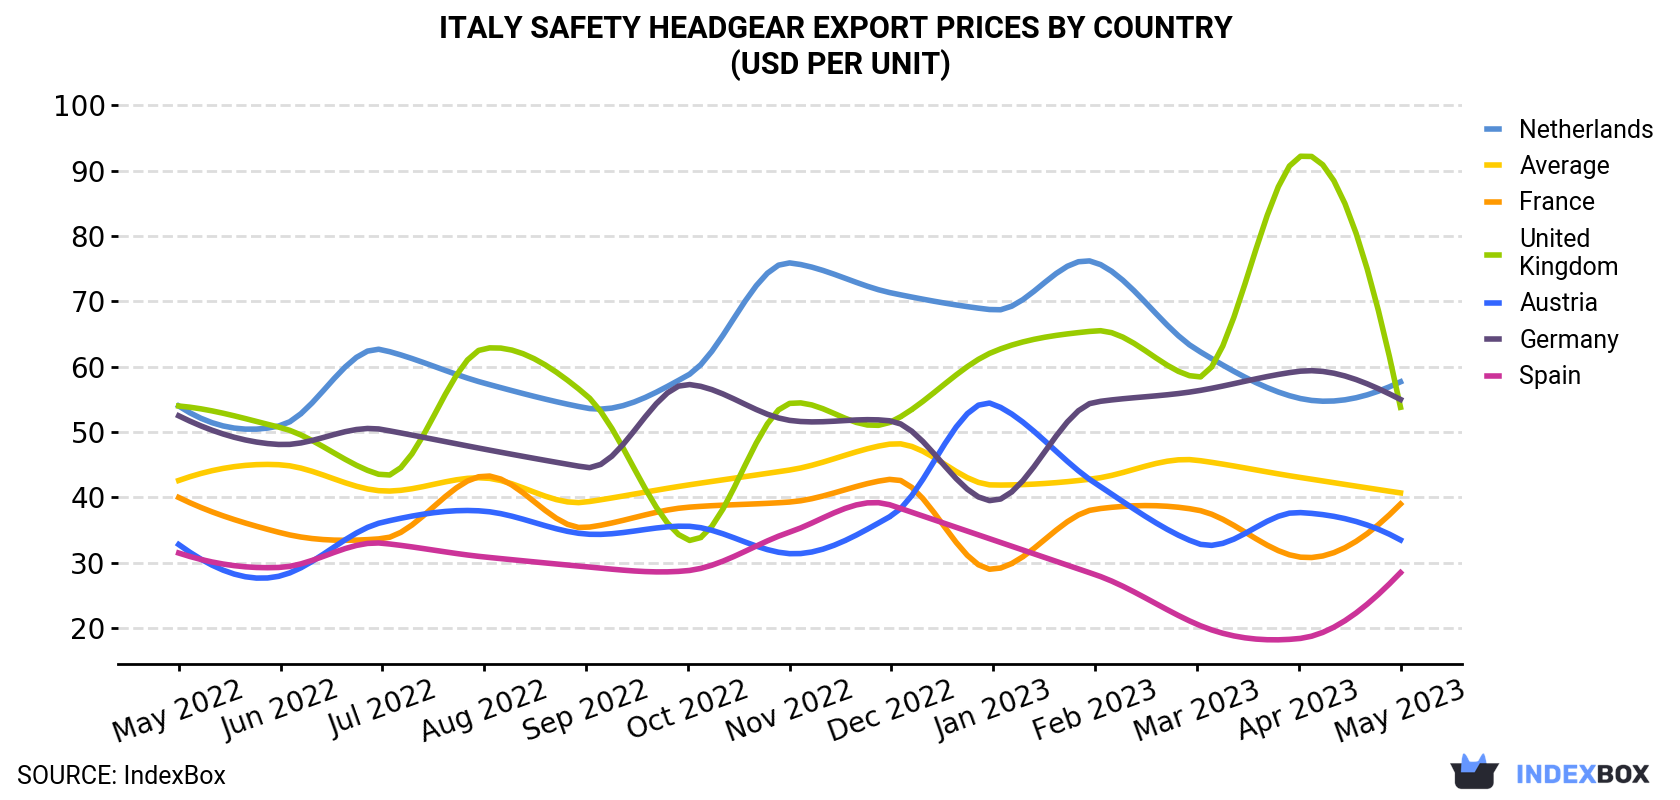 Italy Safety Headgear Export Prices By Country (USD Per Unit)